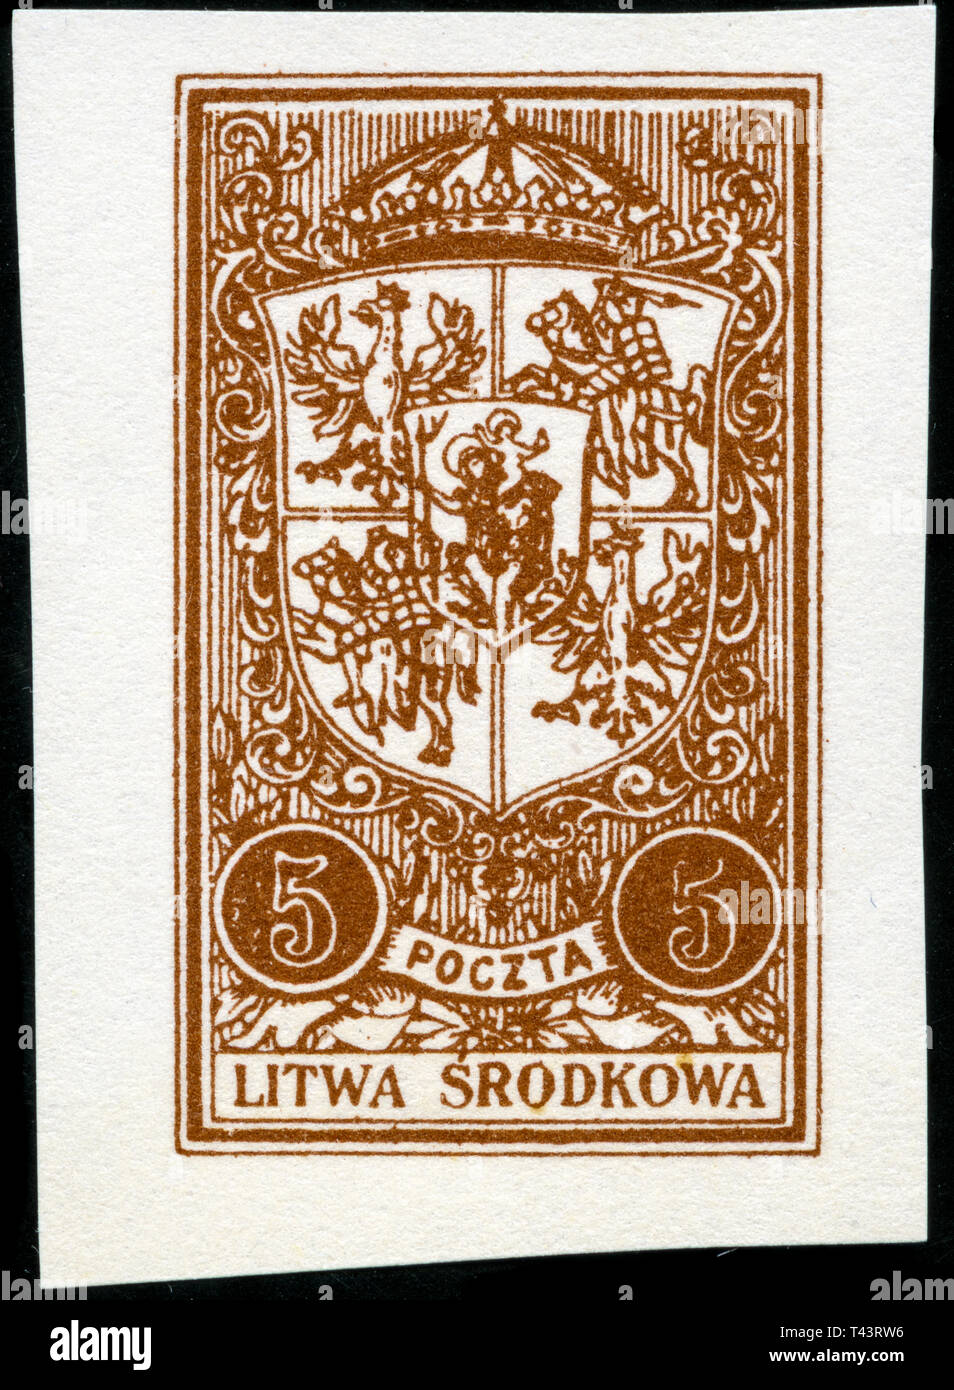 Postage stamp from the former state of Central Lithuania in the Several images series issued in 1921 Stock Photo